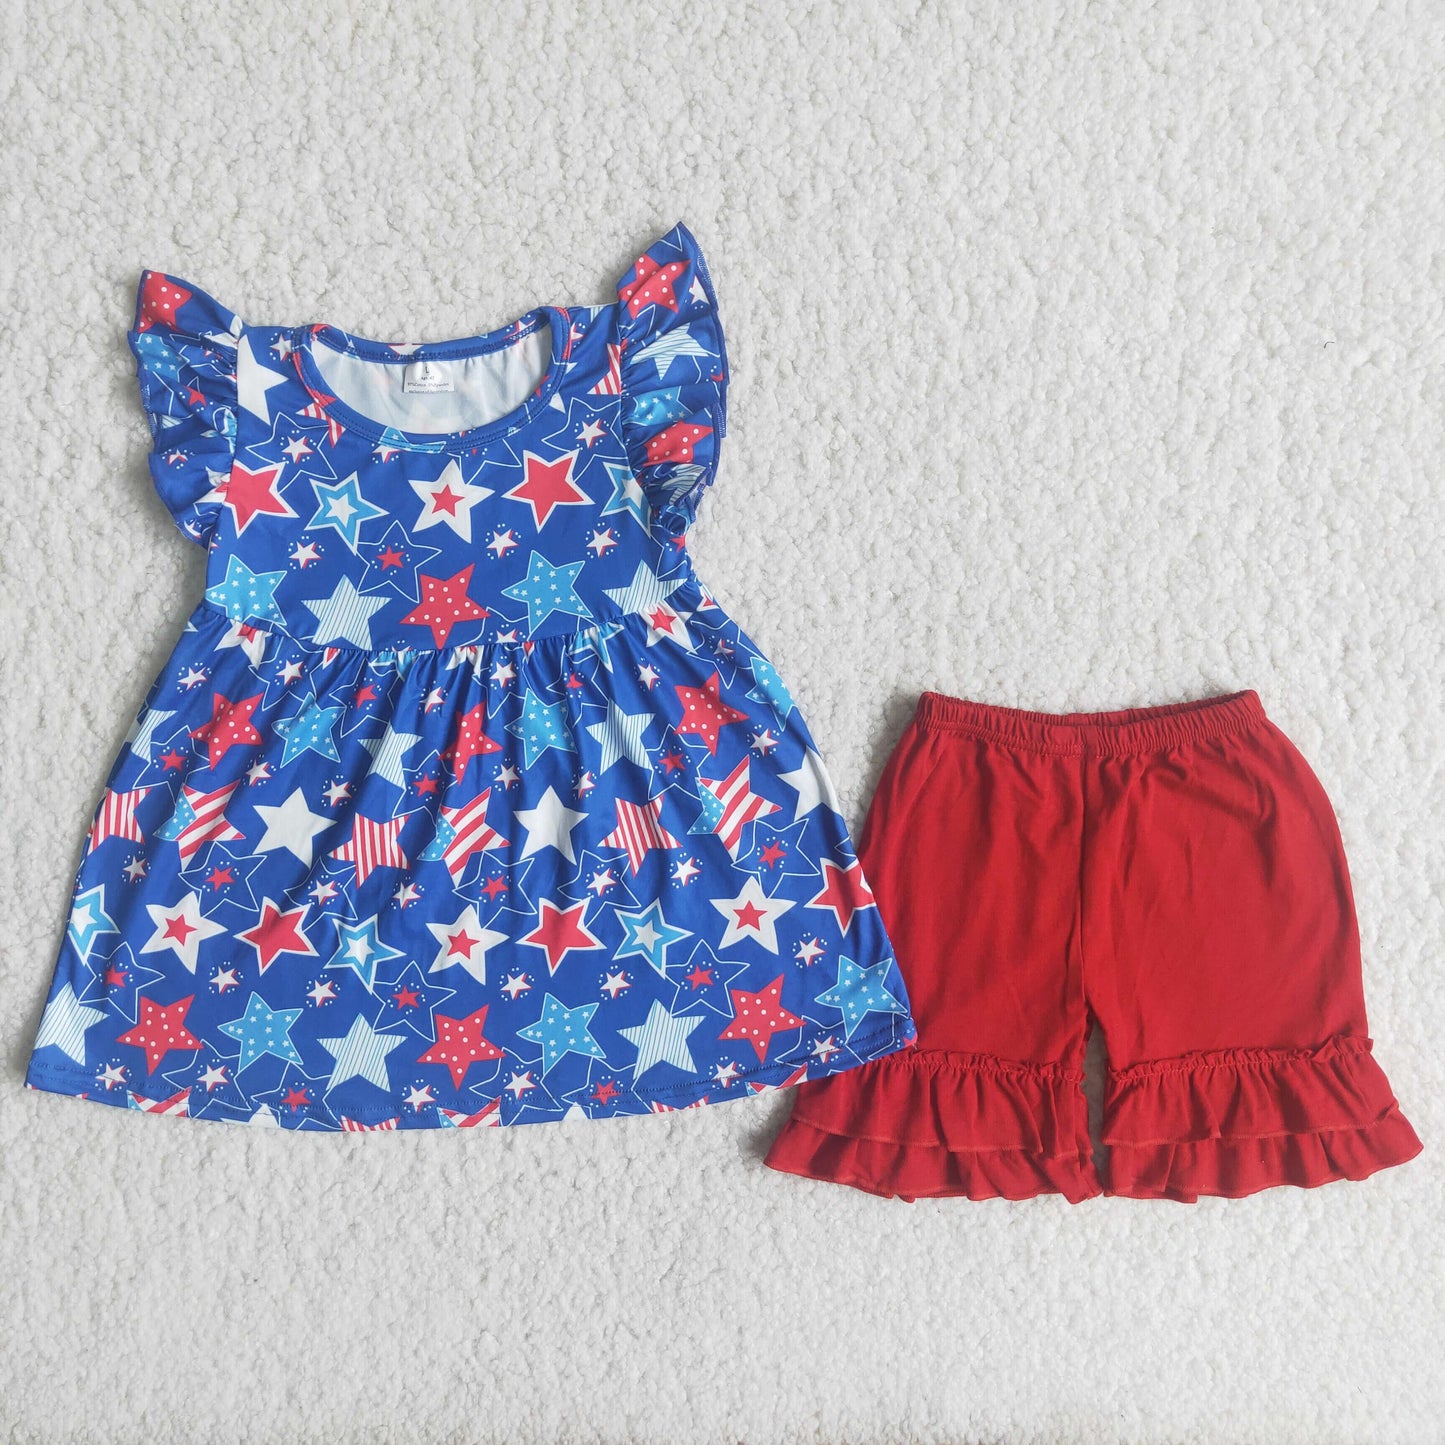 Girls star print flutter sleeve top solid red shorts outfit